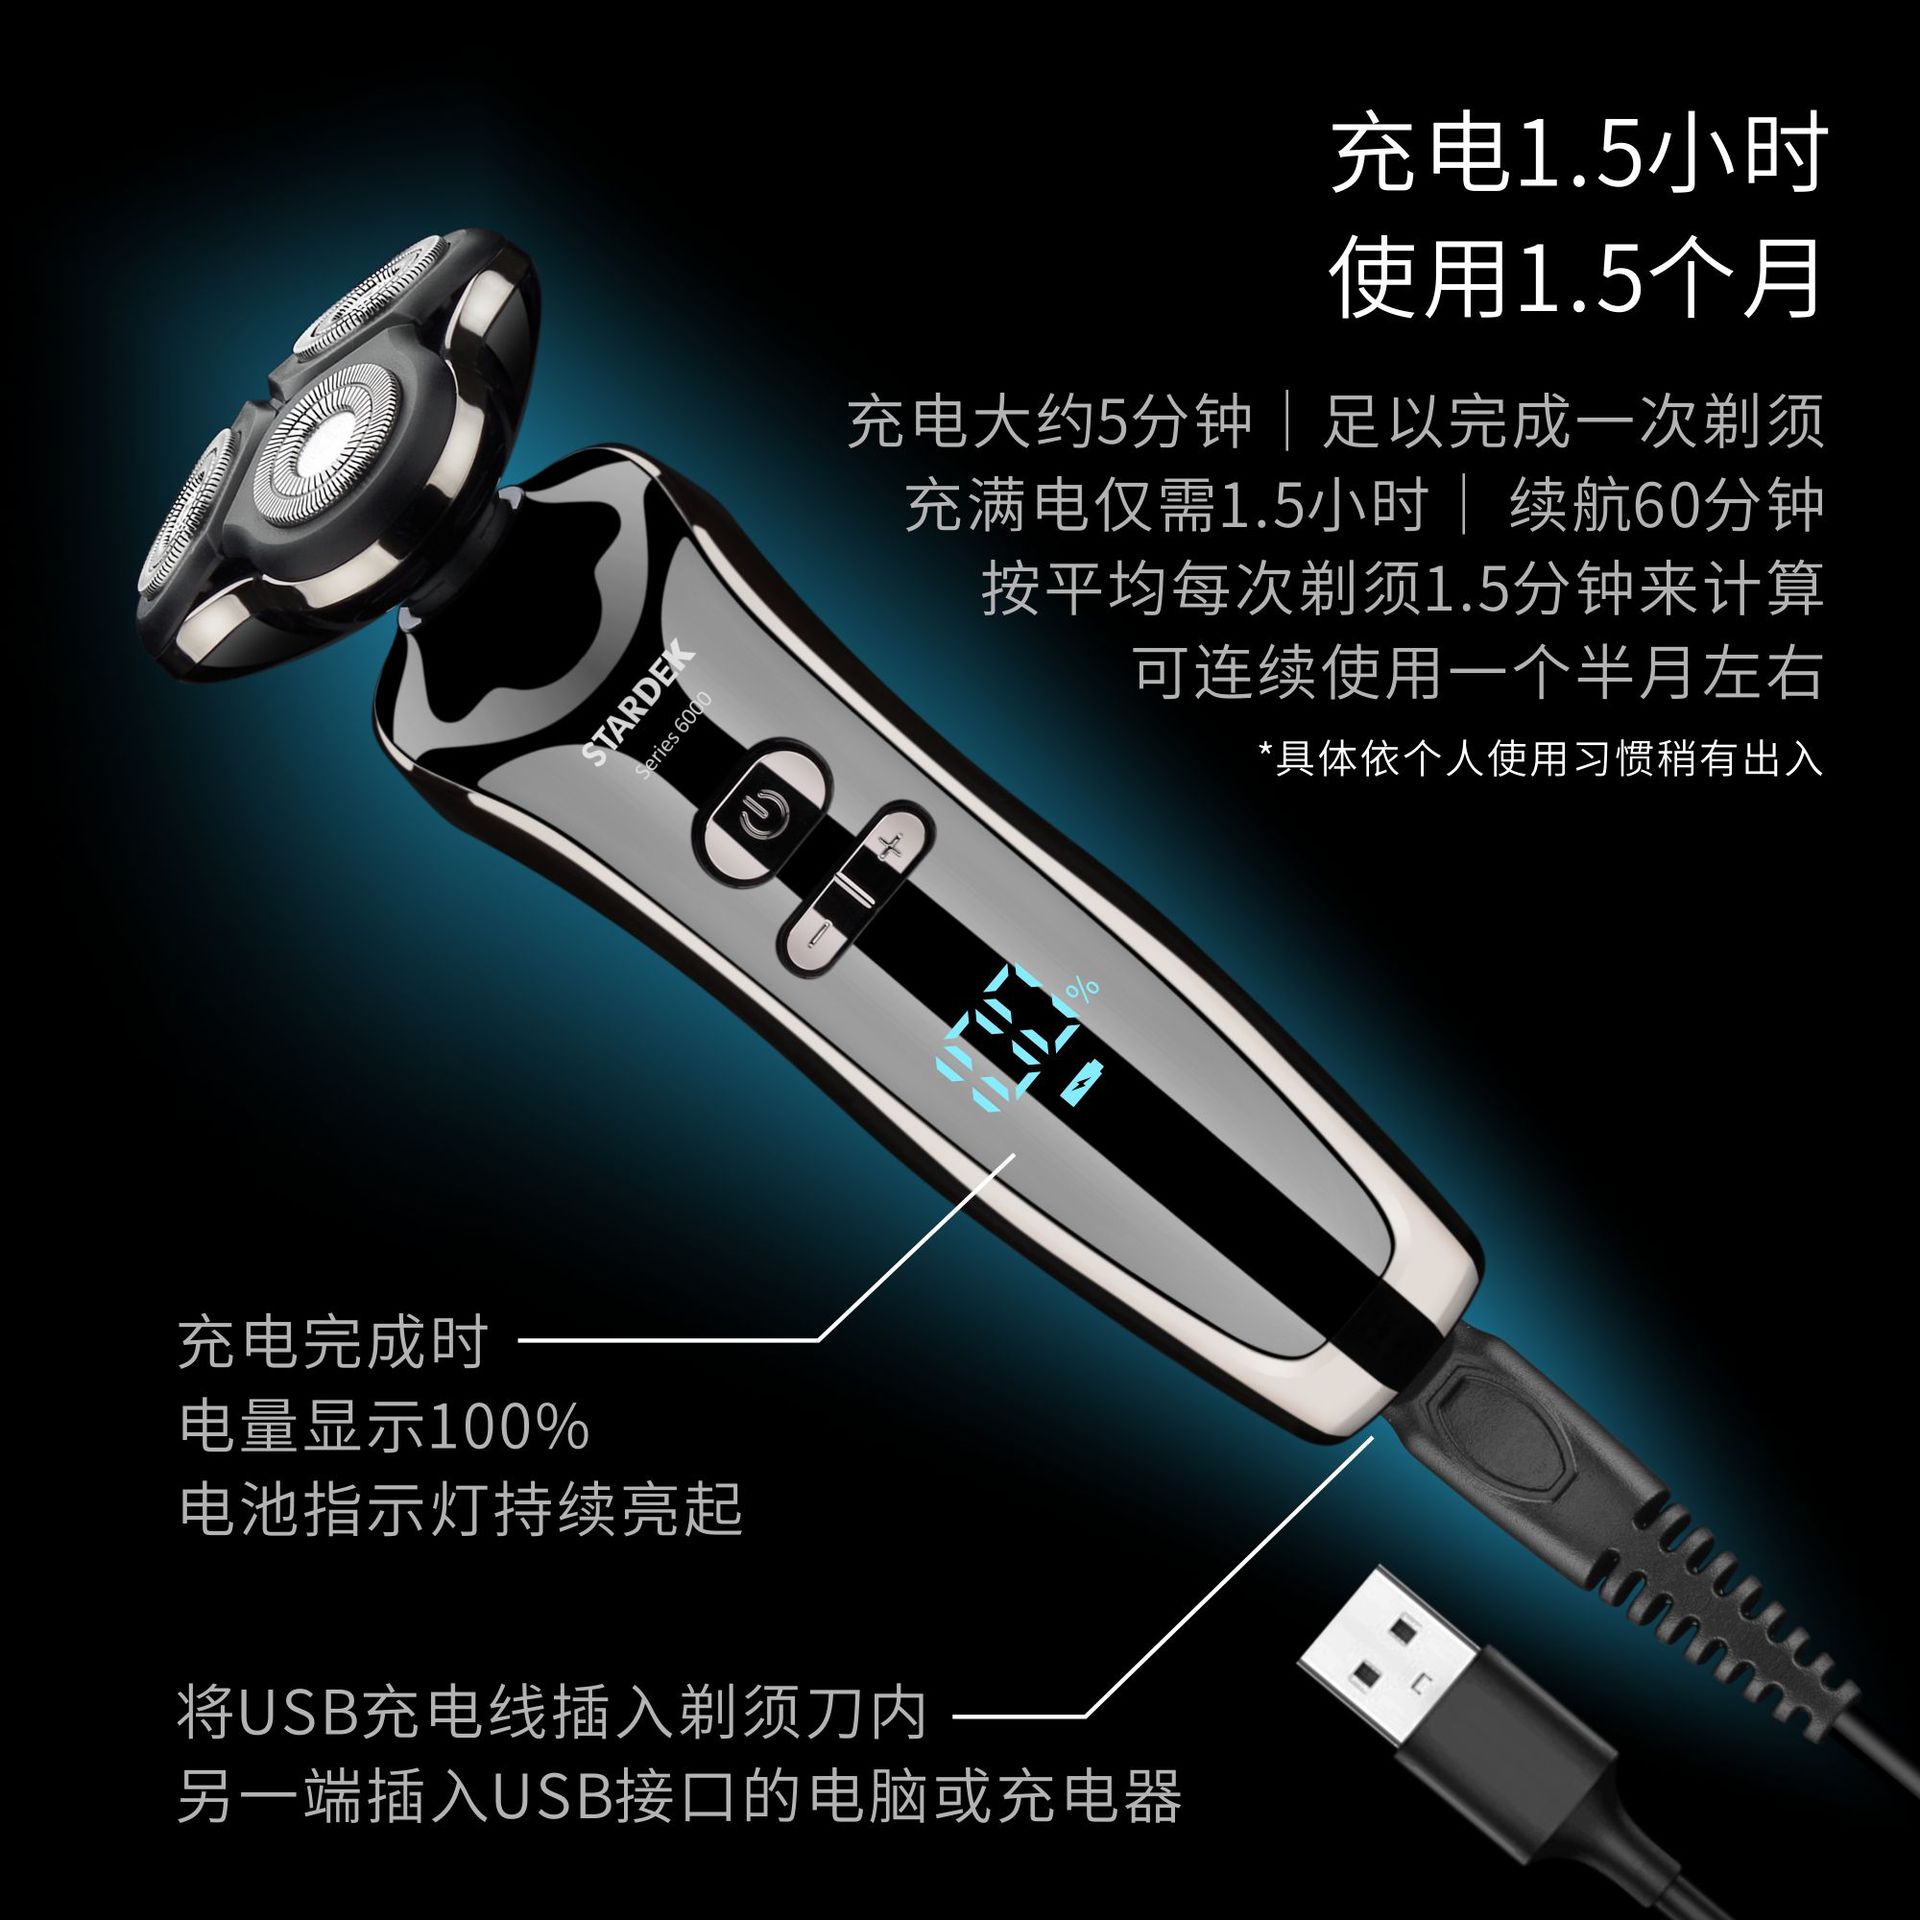 Factory Direct Sales New Electric Shaver Rechargeable Intelligent Digital Display Multi-Function Shaver Exclusive for Cross-Border Generation Hair